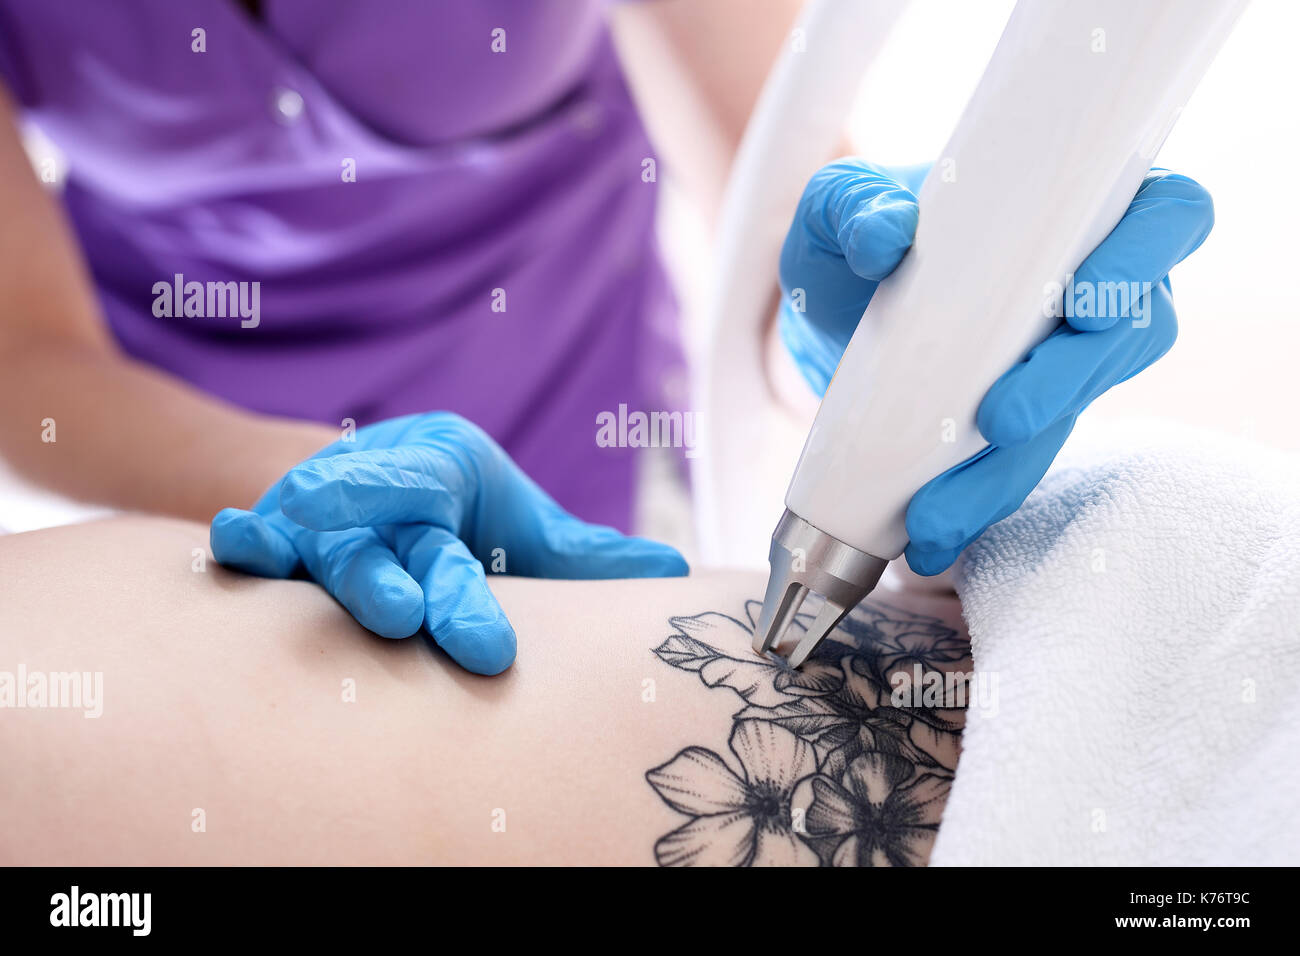 Permanent tattoo removal|Laser Tattoo Removal in Delhi|Tattoo Removal  Surgery in Delhi